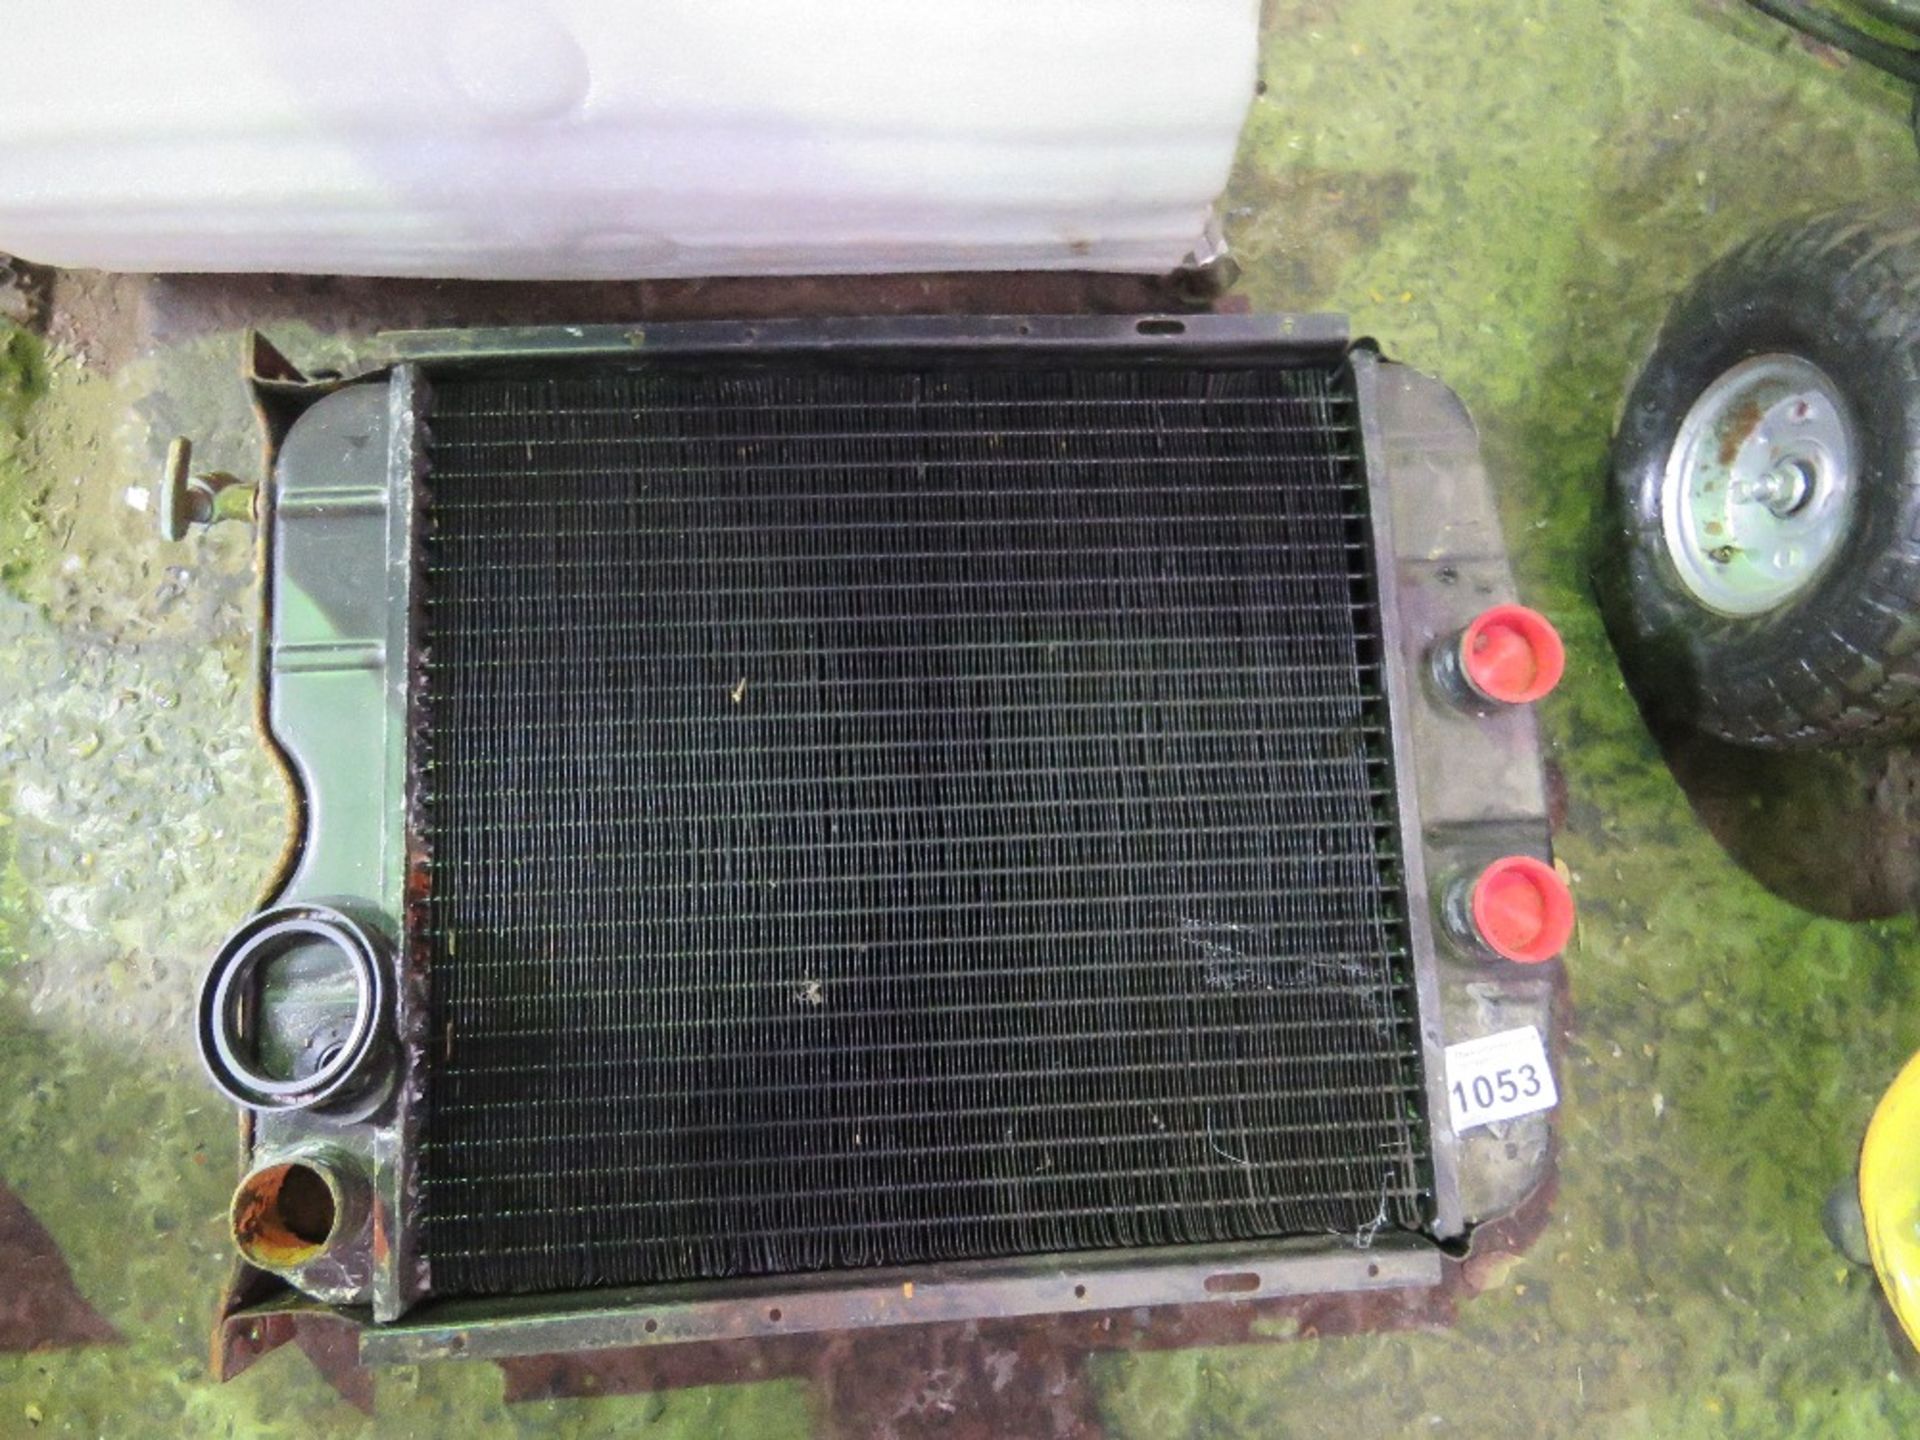 RADIATOR SET BELIEVED TO BE FOR FORDSON MAJOR TRACTOR. - Image 2 of 2